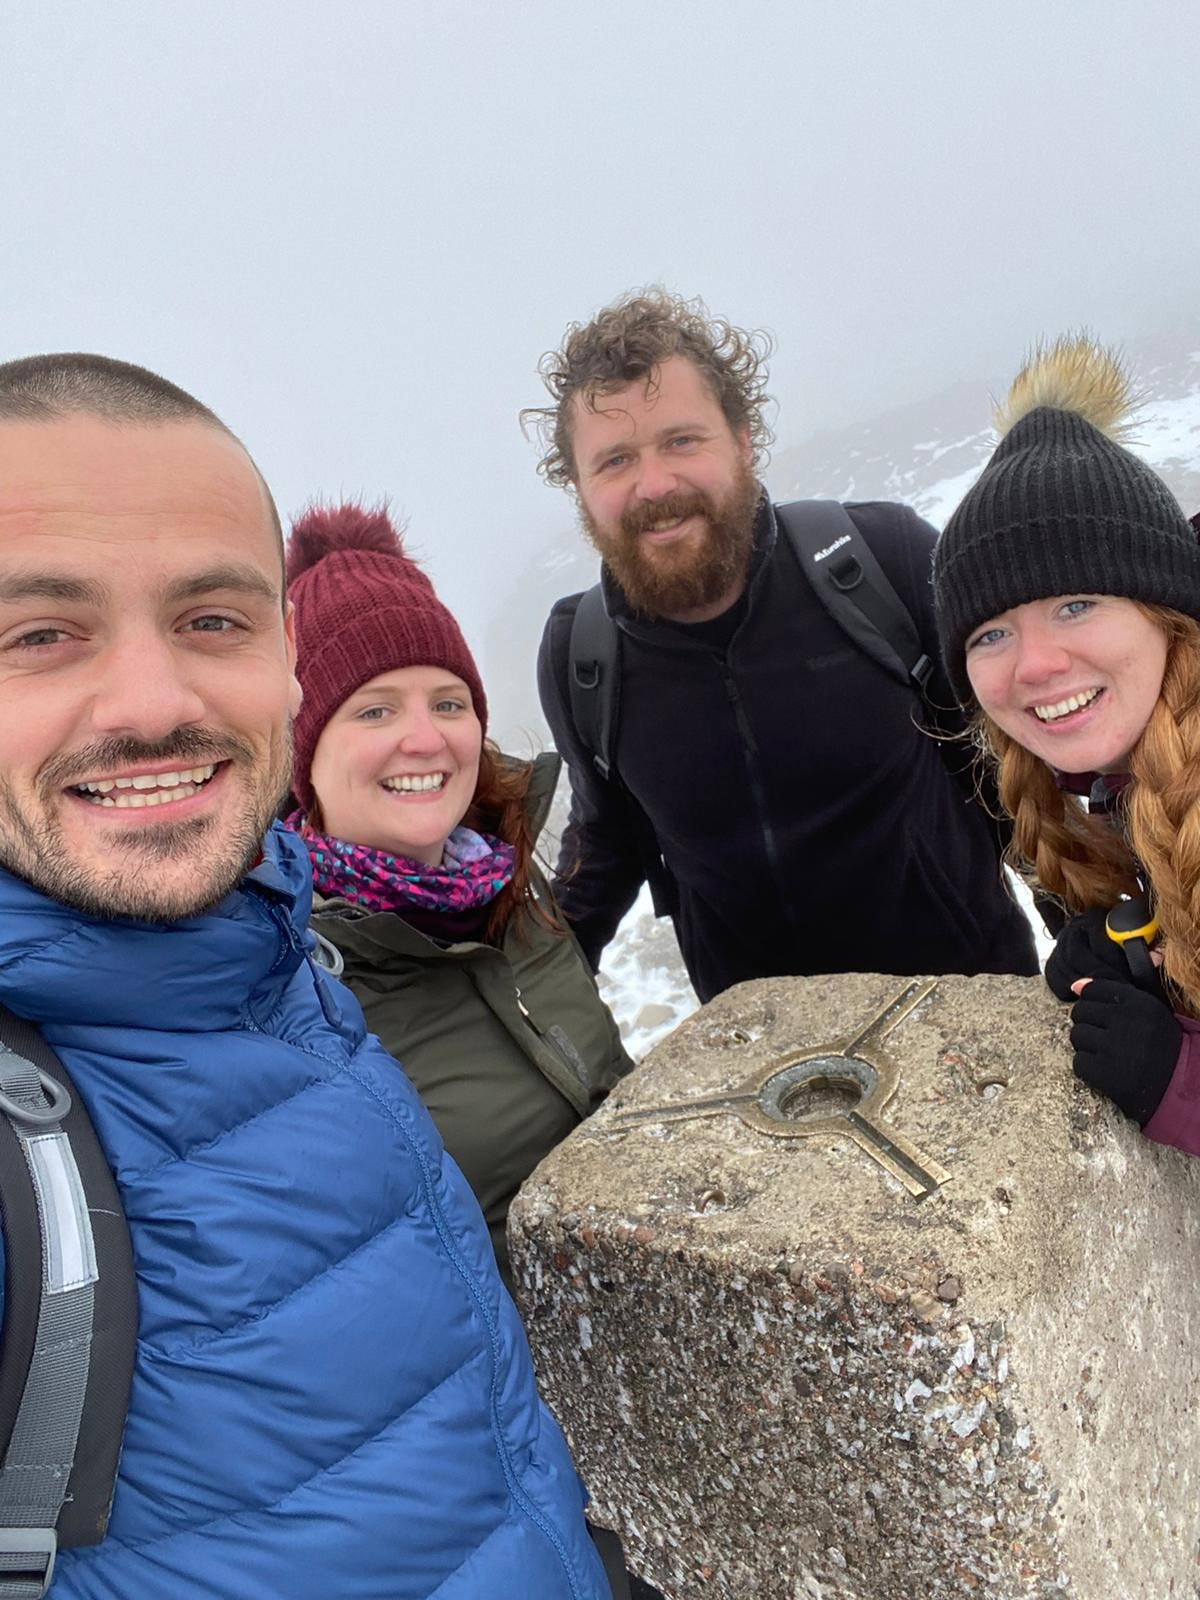 Lauren McAdam who completed the three peaks challenge to donate funds to our campaign. She was accompanied by her husband David Gorman and friends Nicola and Brian Booth joined the for Ben Nevis. 